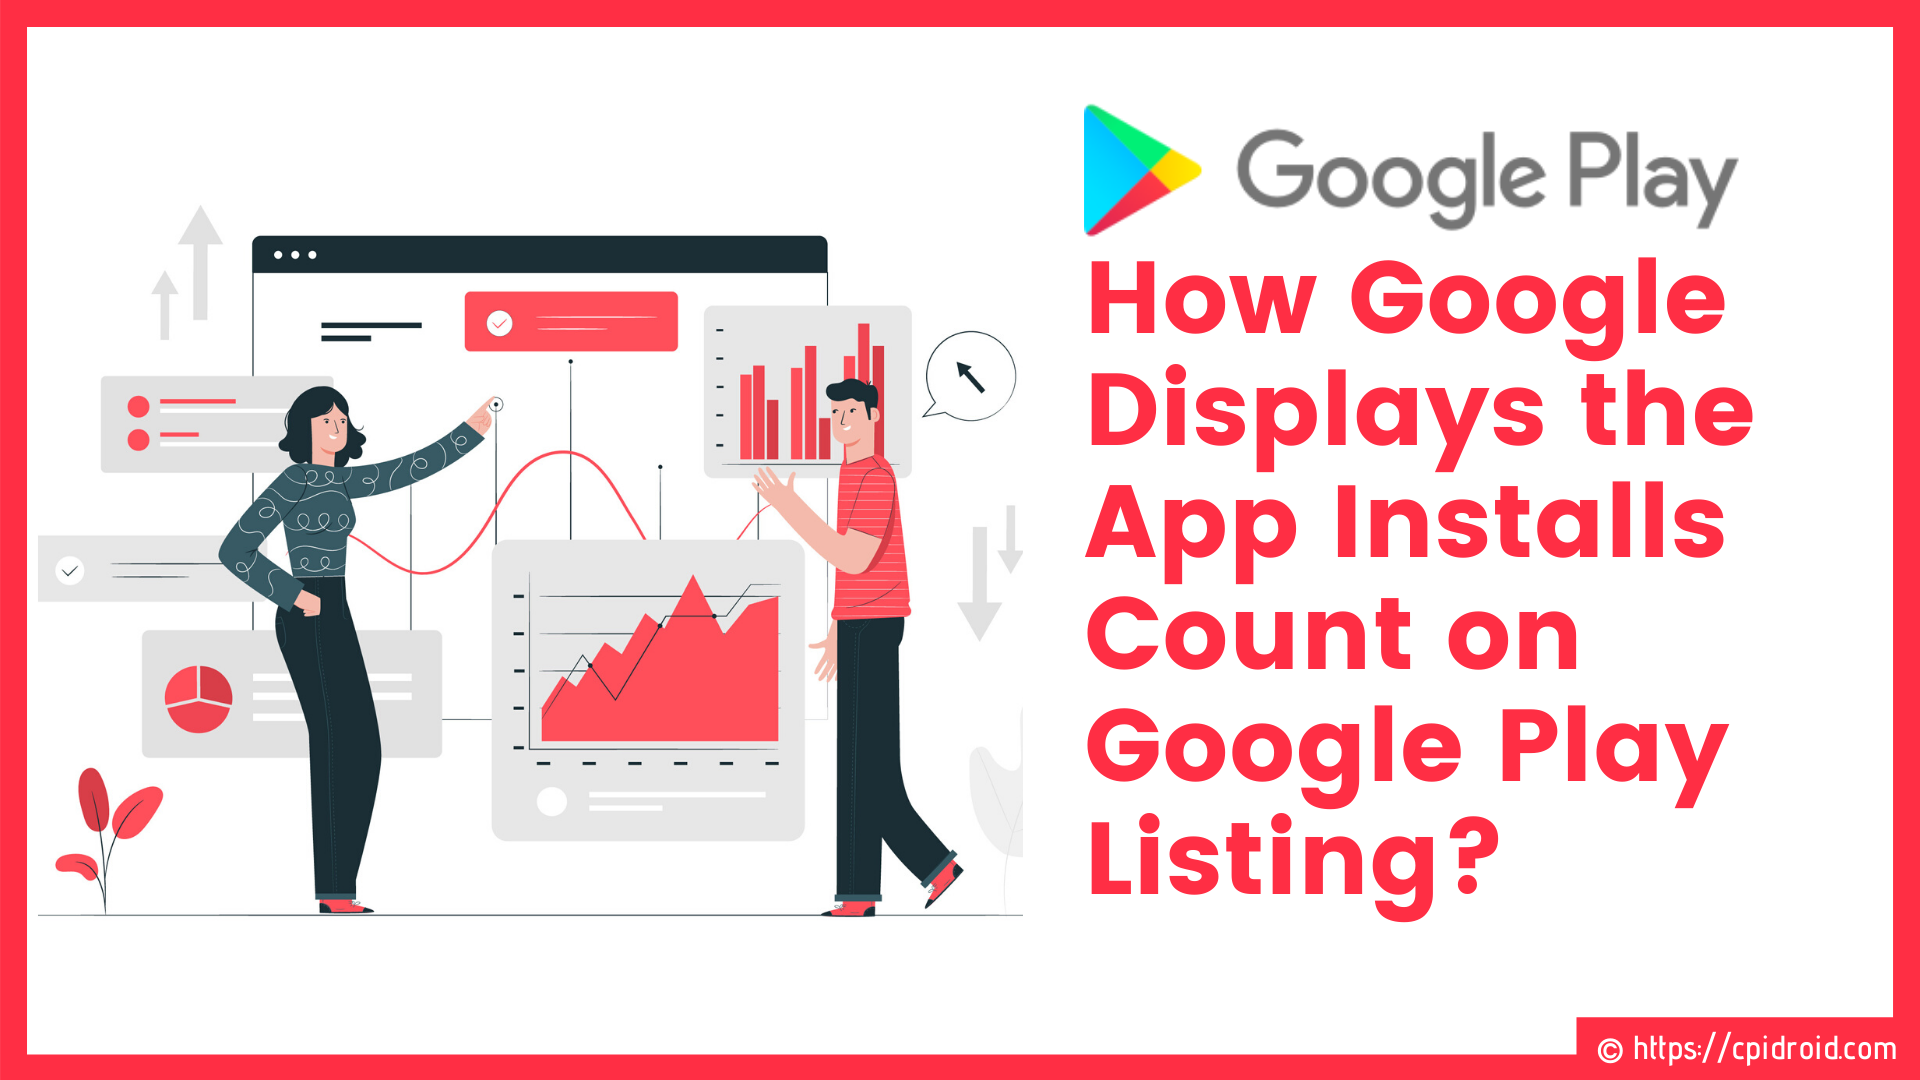 How Google Displays the App Installs Count on Google Play Listing?